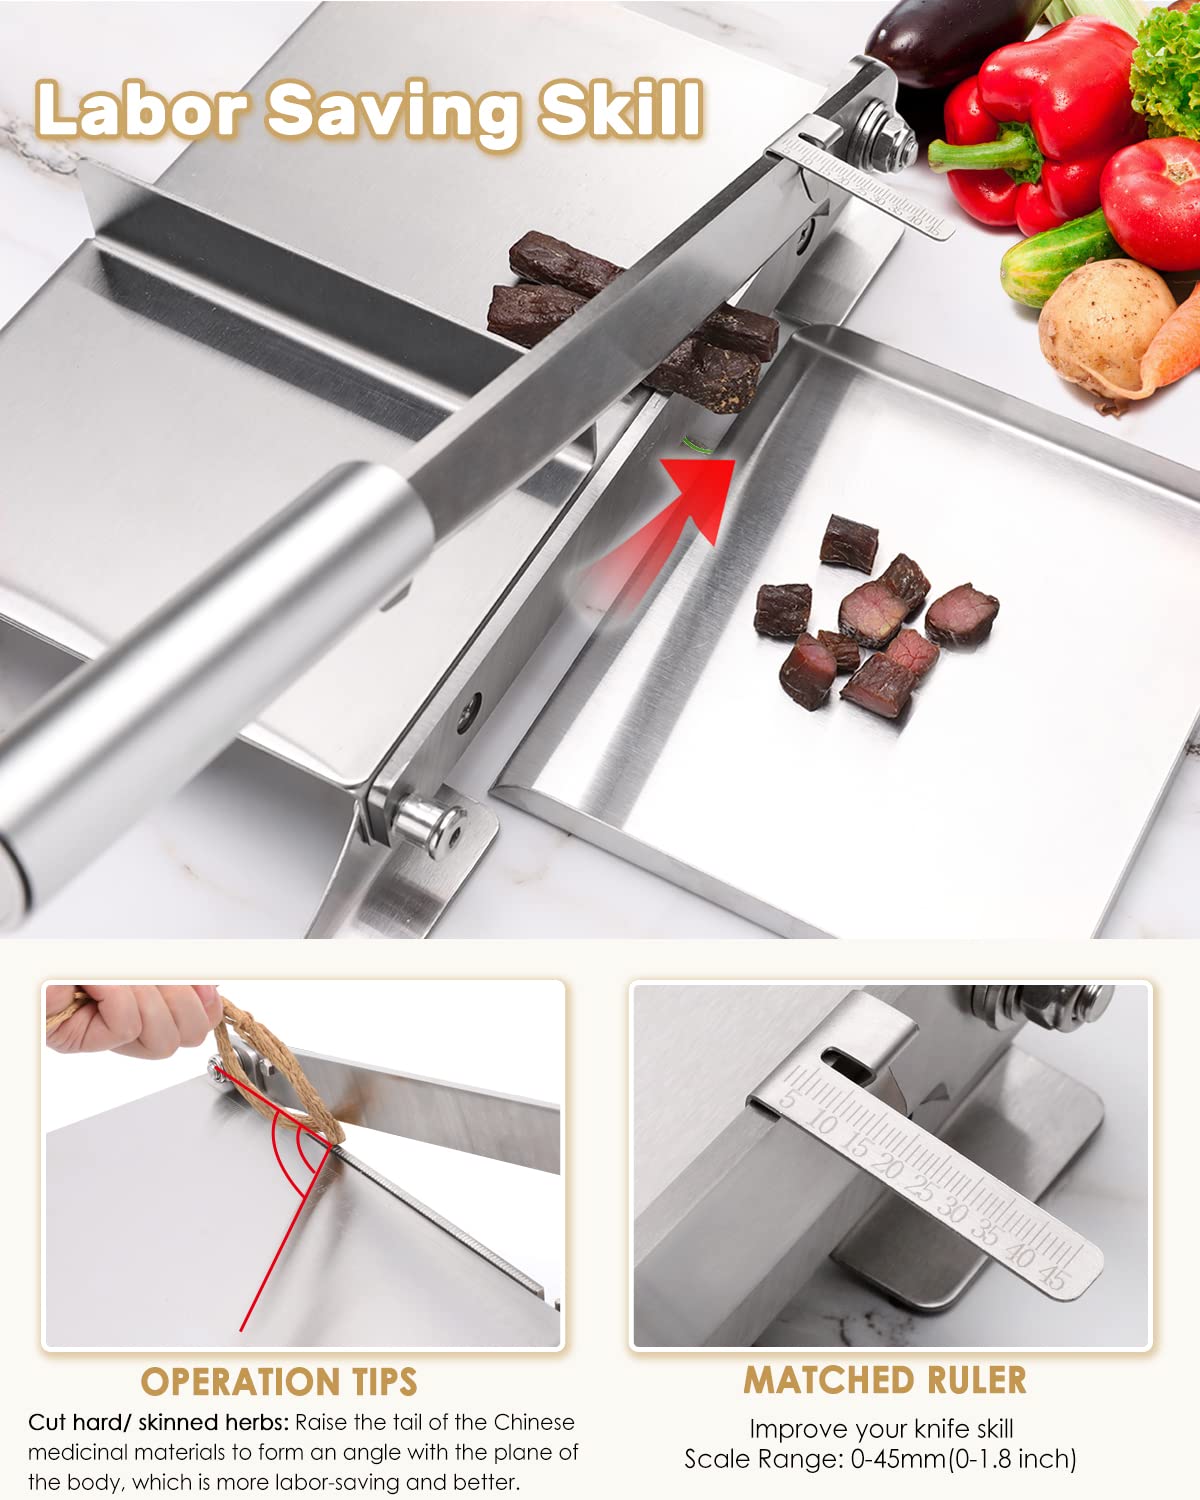 Moongiantgo Biltong Slicer Manual Meat Slicer Cutter with Scale Stainless Steel Cutting Machine Hand Herb Root Slicer for Salami Ham Bacon Vegetables Deli Ginseng Fish (KD0270)